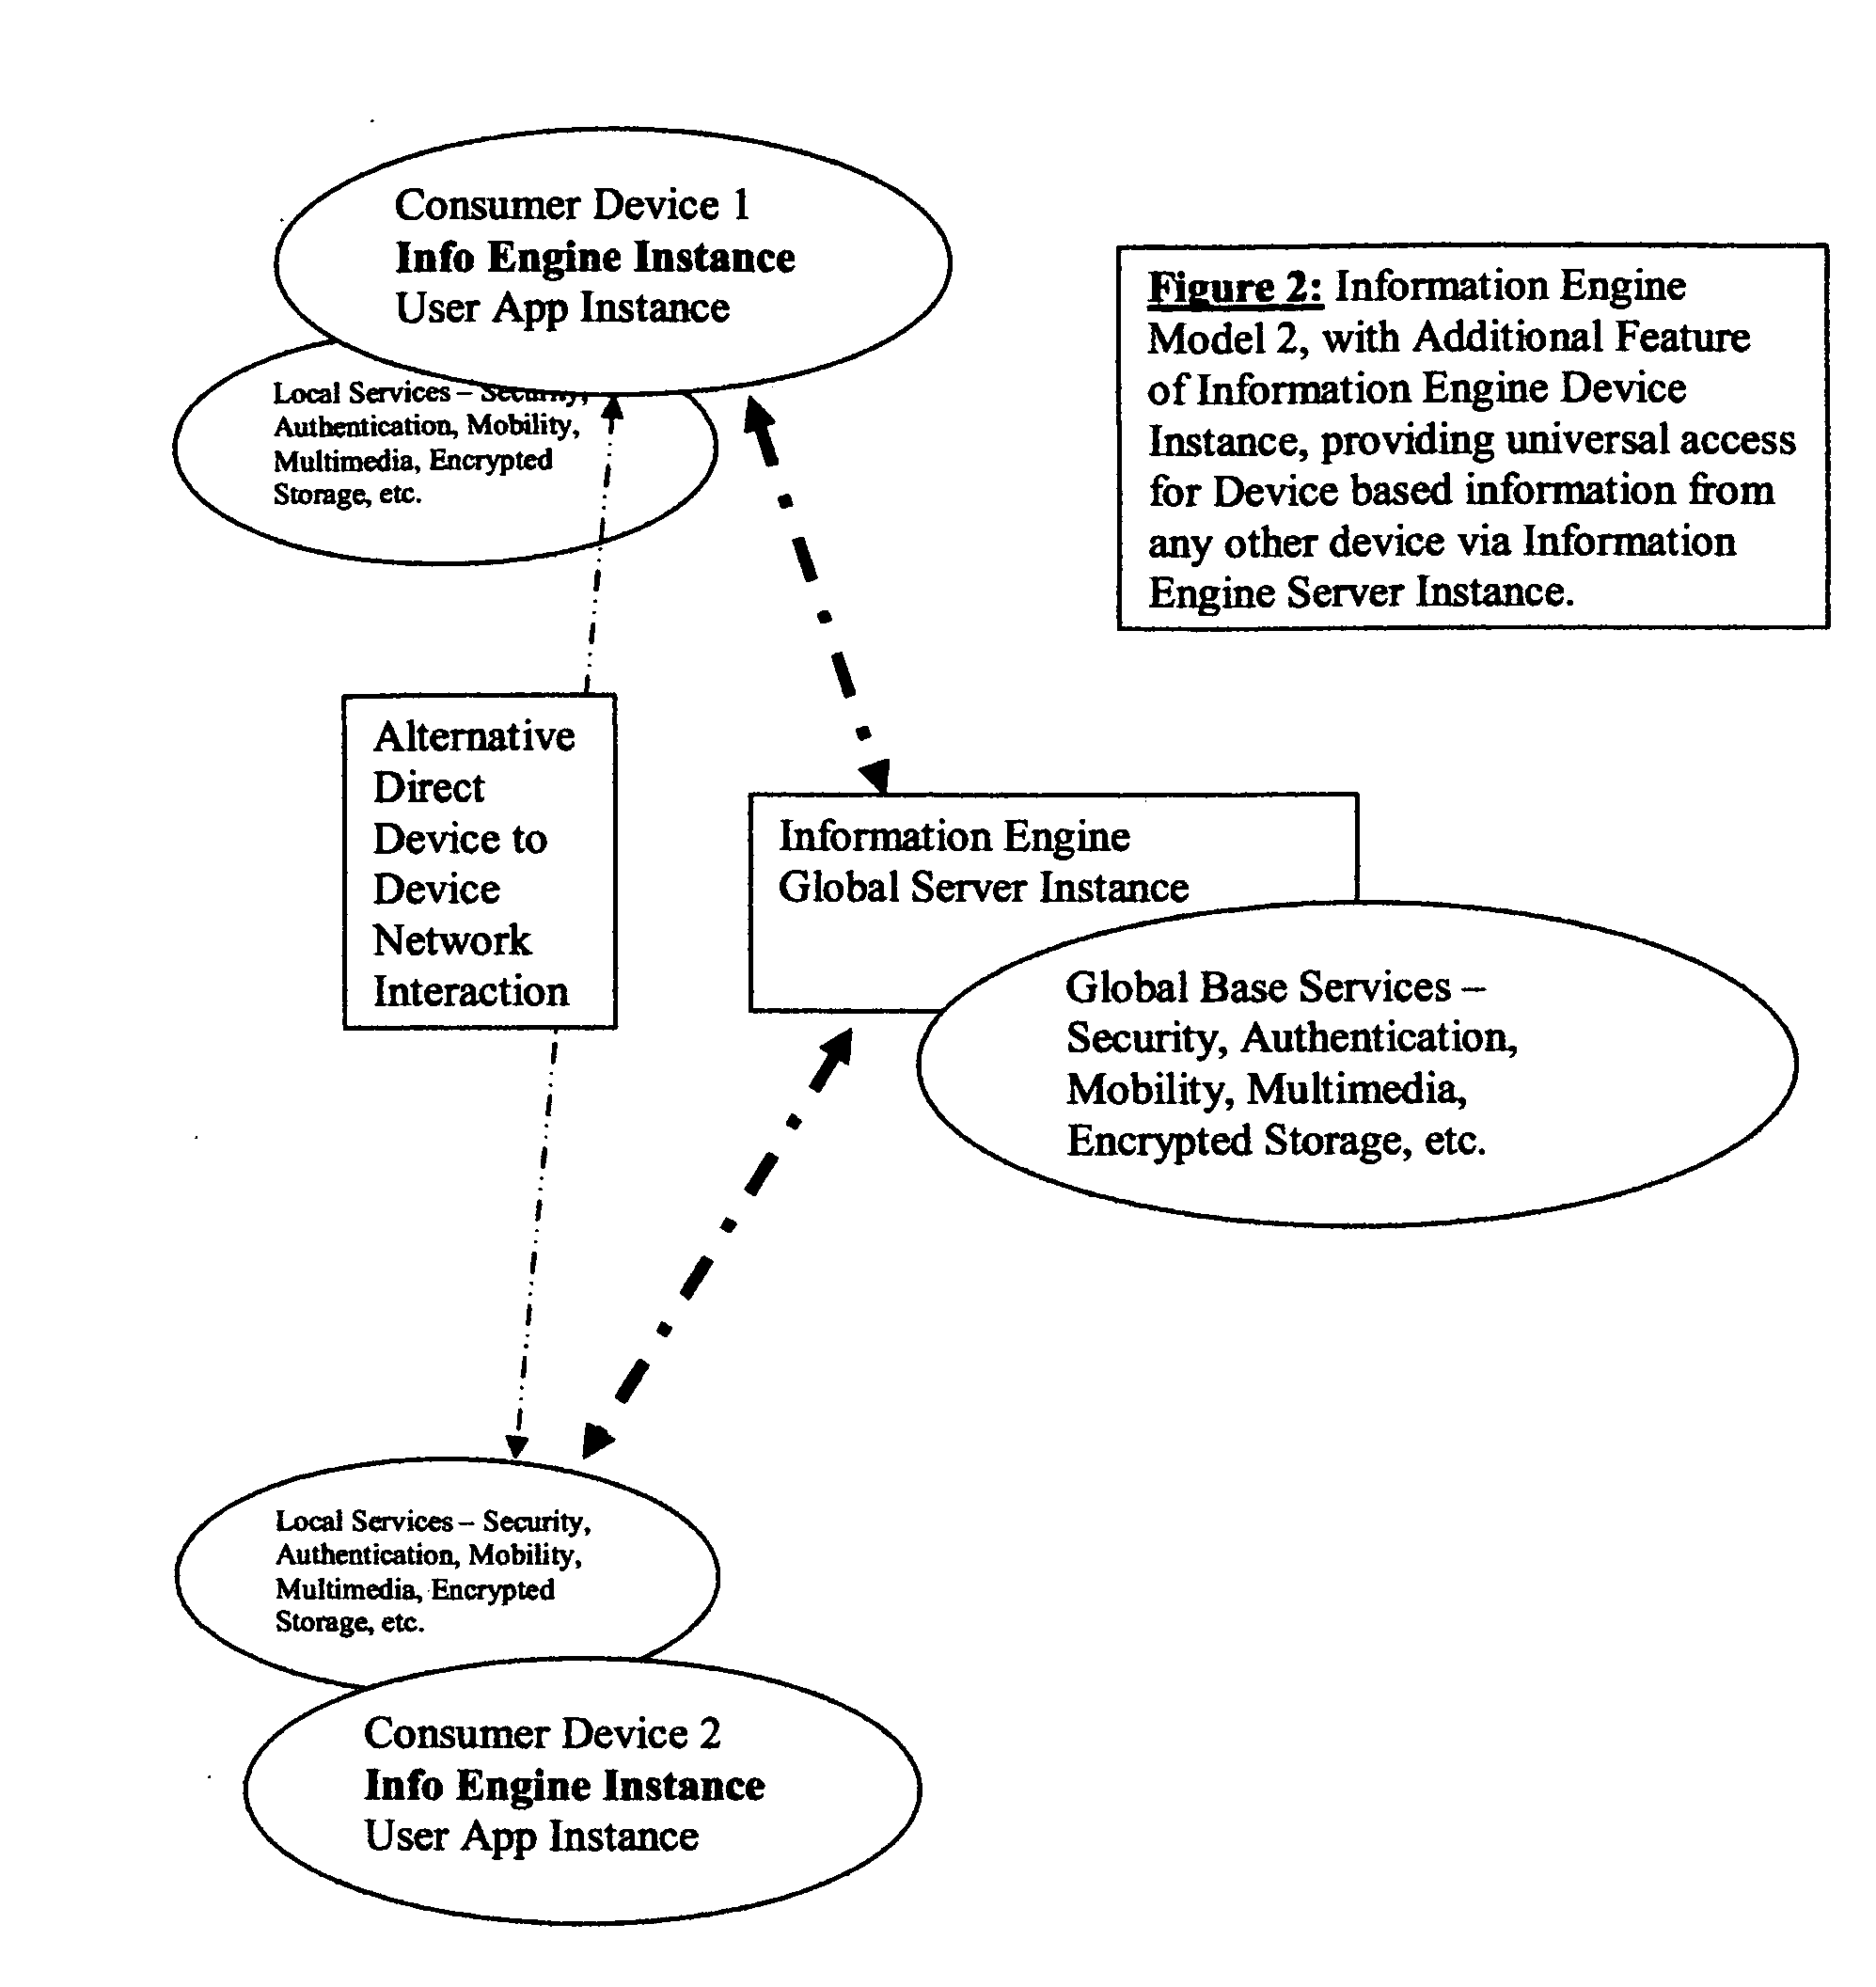 Method and System of Information Engine with Make-Share-Search of consumer and professional Information and Content for Multi-media and Mobile Global Internet